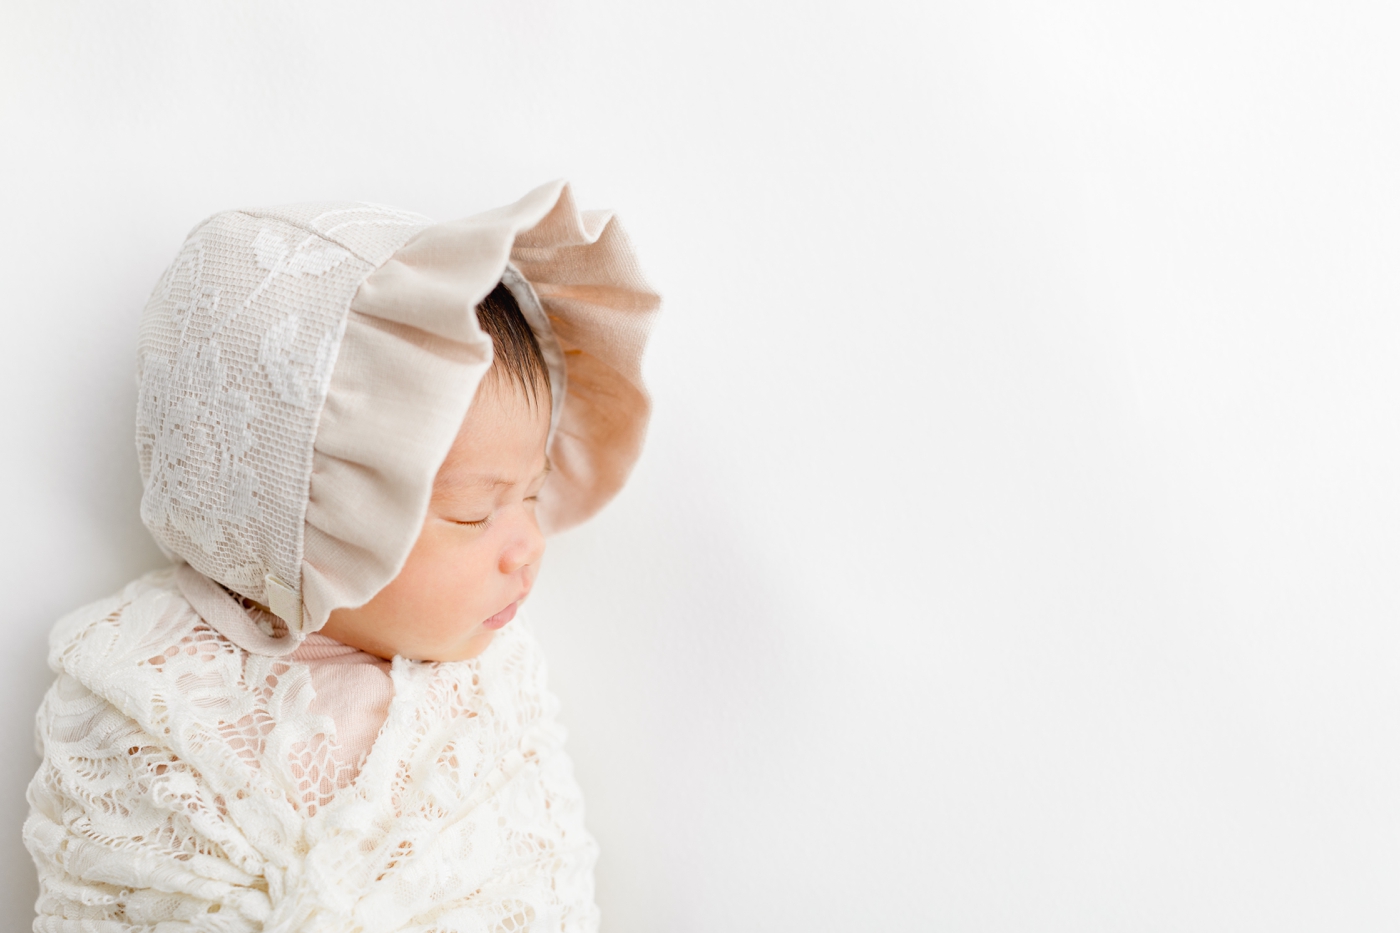 Baby wearing lace bonnet during light and airy studio newborn session with Sana Ahmed Photography.